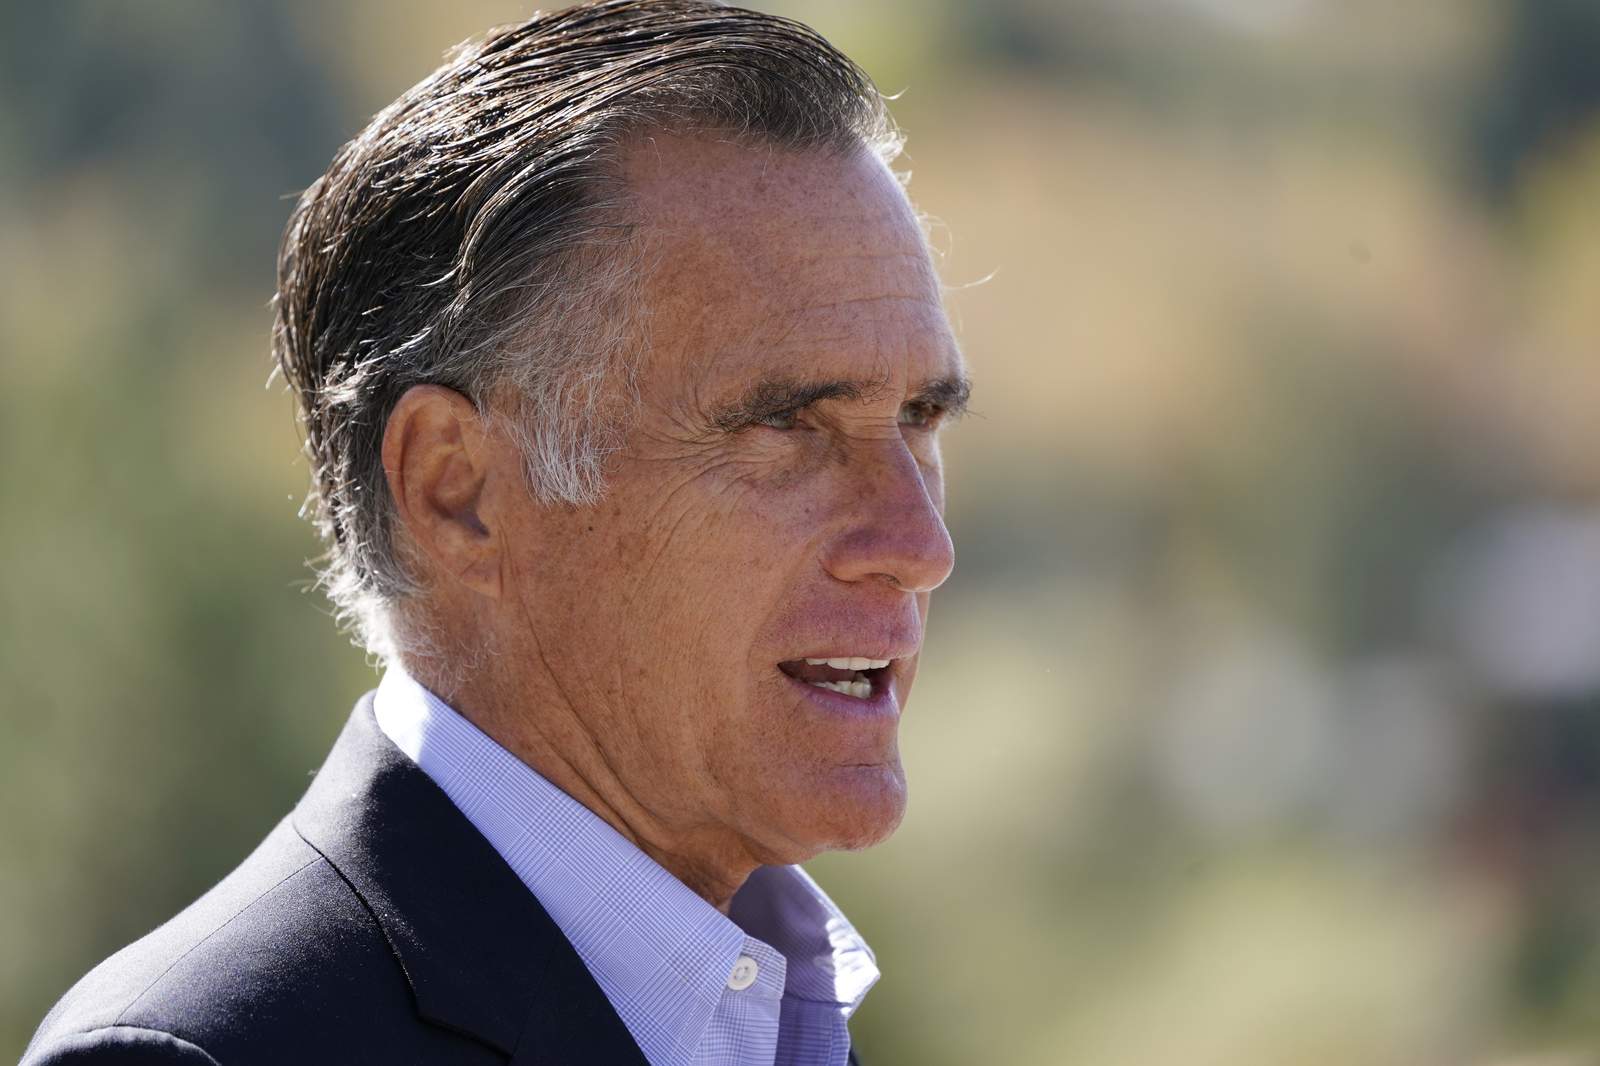 Romney gets Profile in Courage Award for impeachment vote